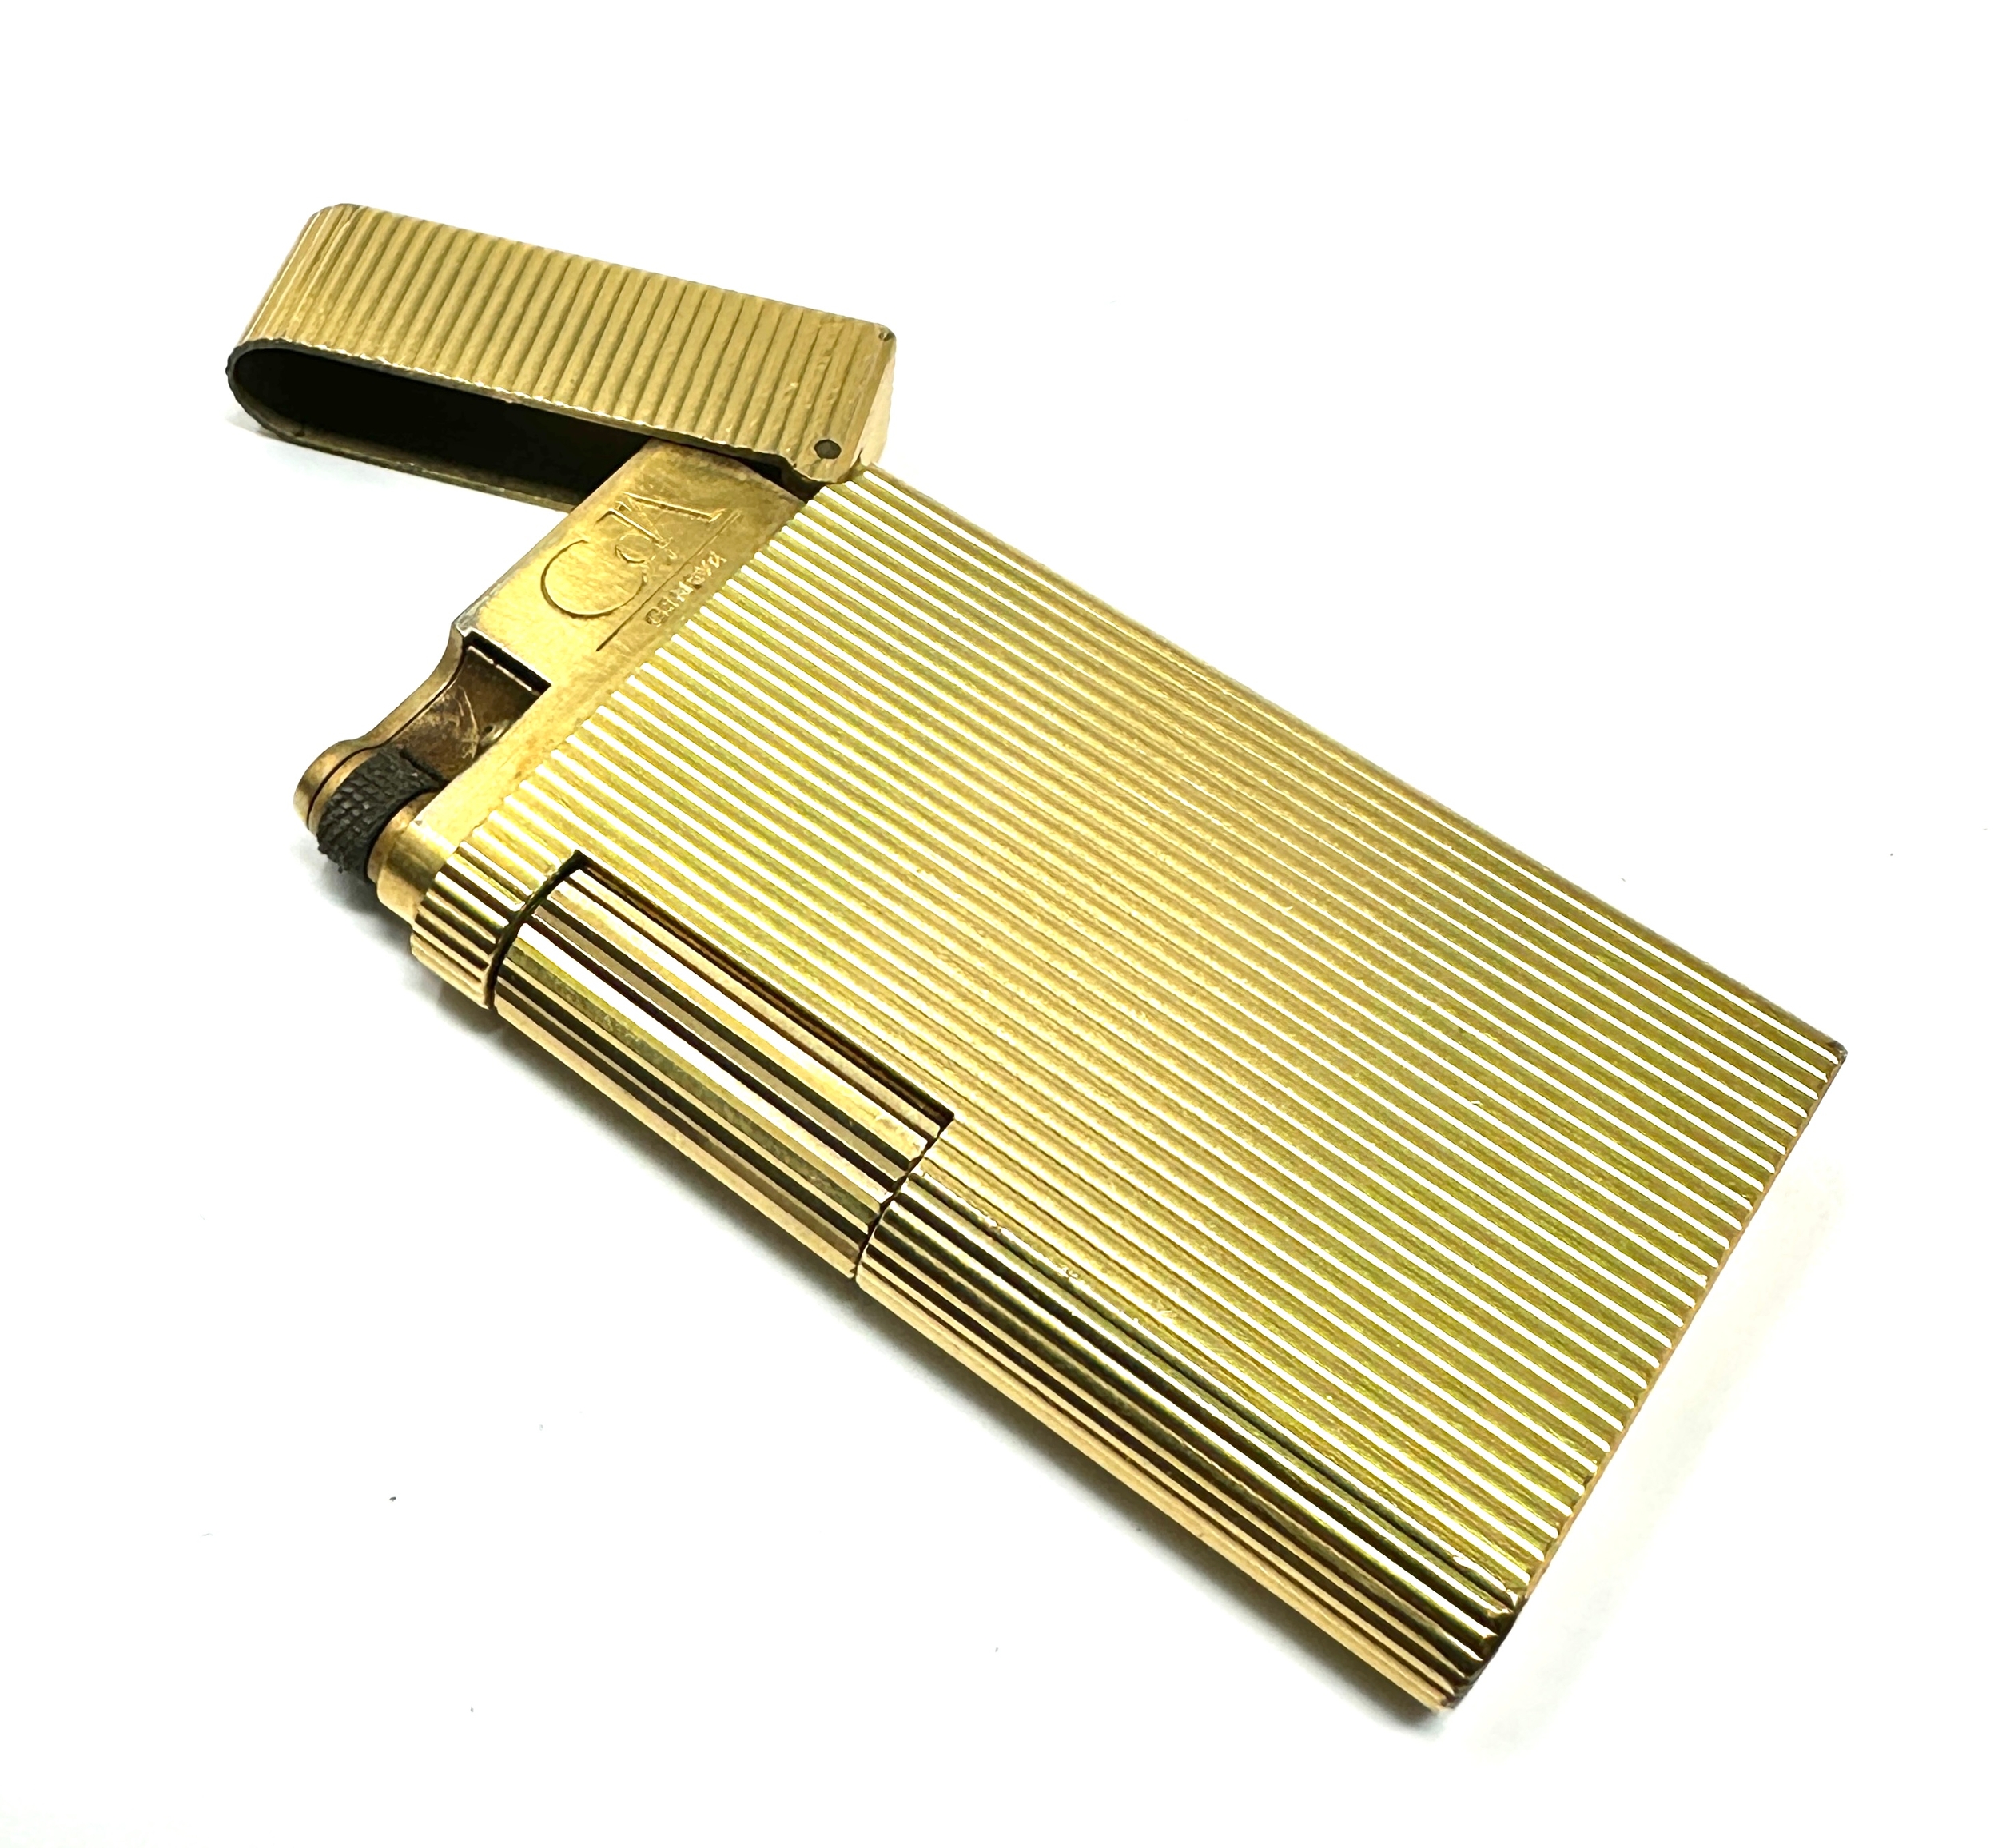 Caran d'Ache cigarette Lighter - Gold Plated - Image 3 of 5